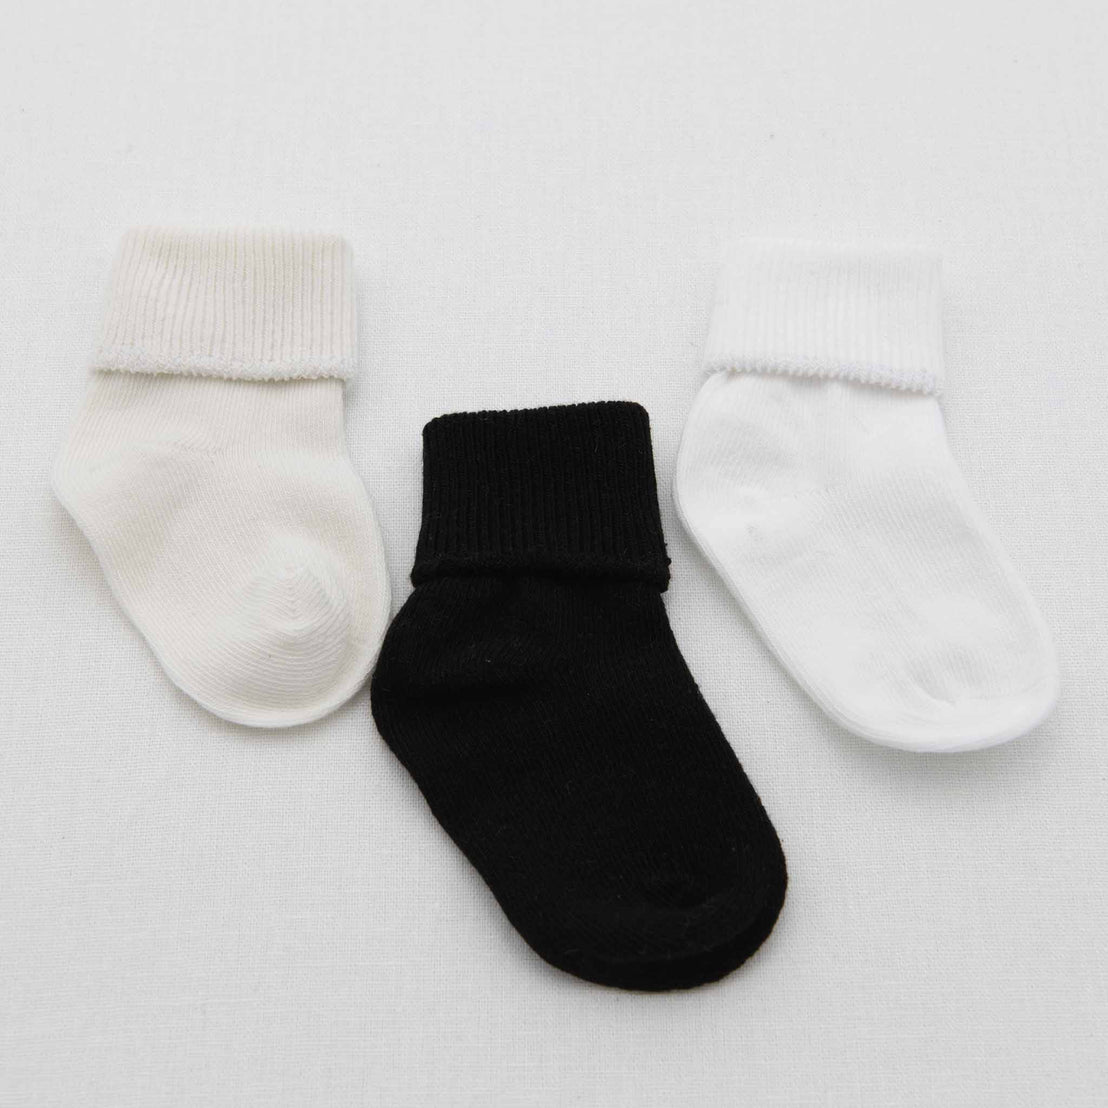 Three Boys Simple Socks, one in ivory, one in black, and another in white, are displayed on a light gray background.